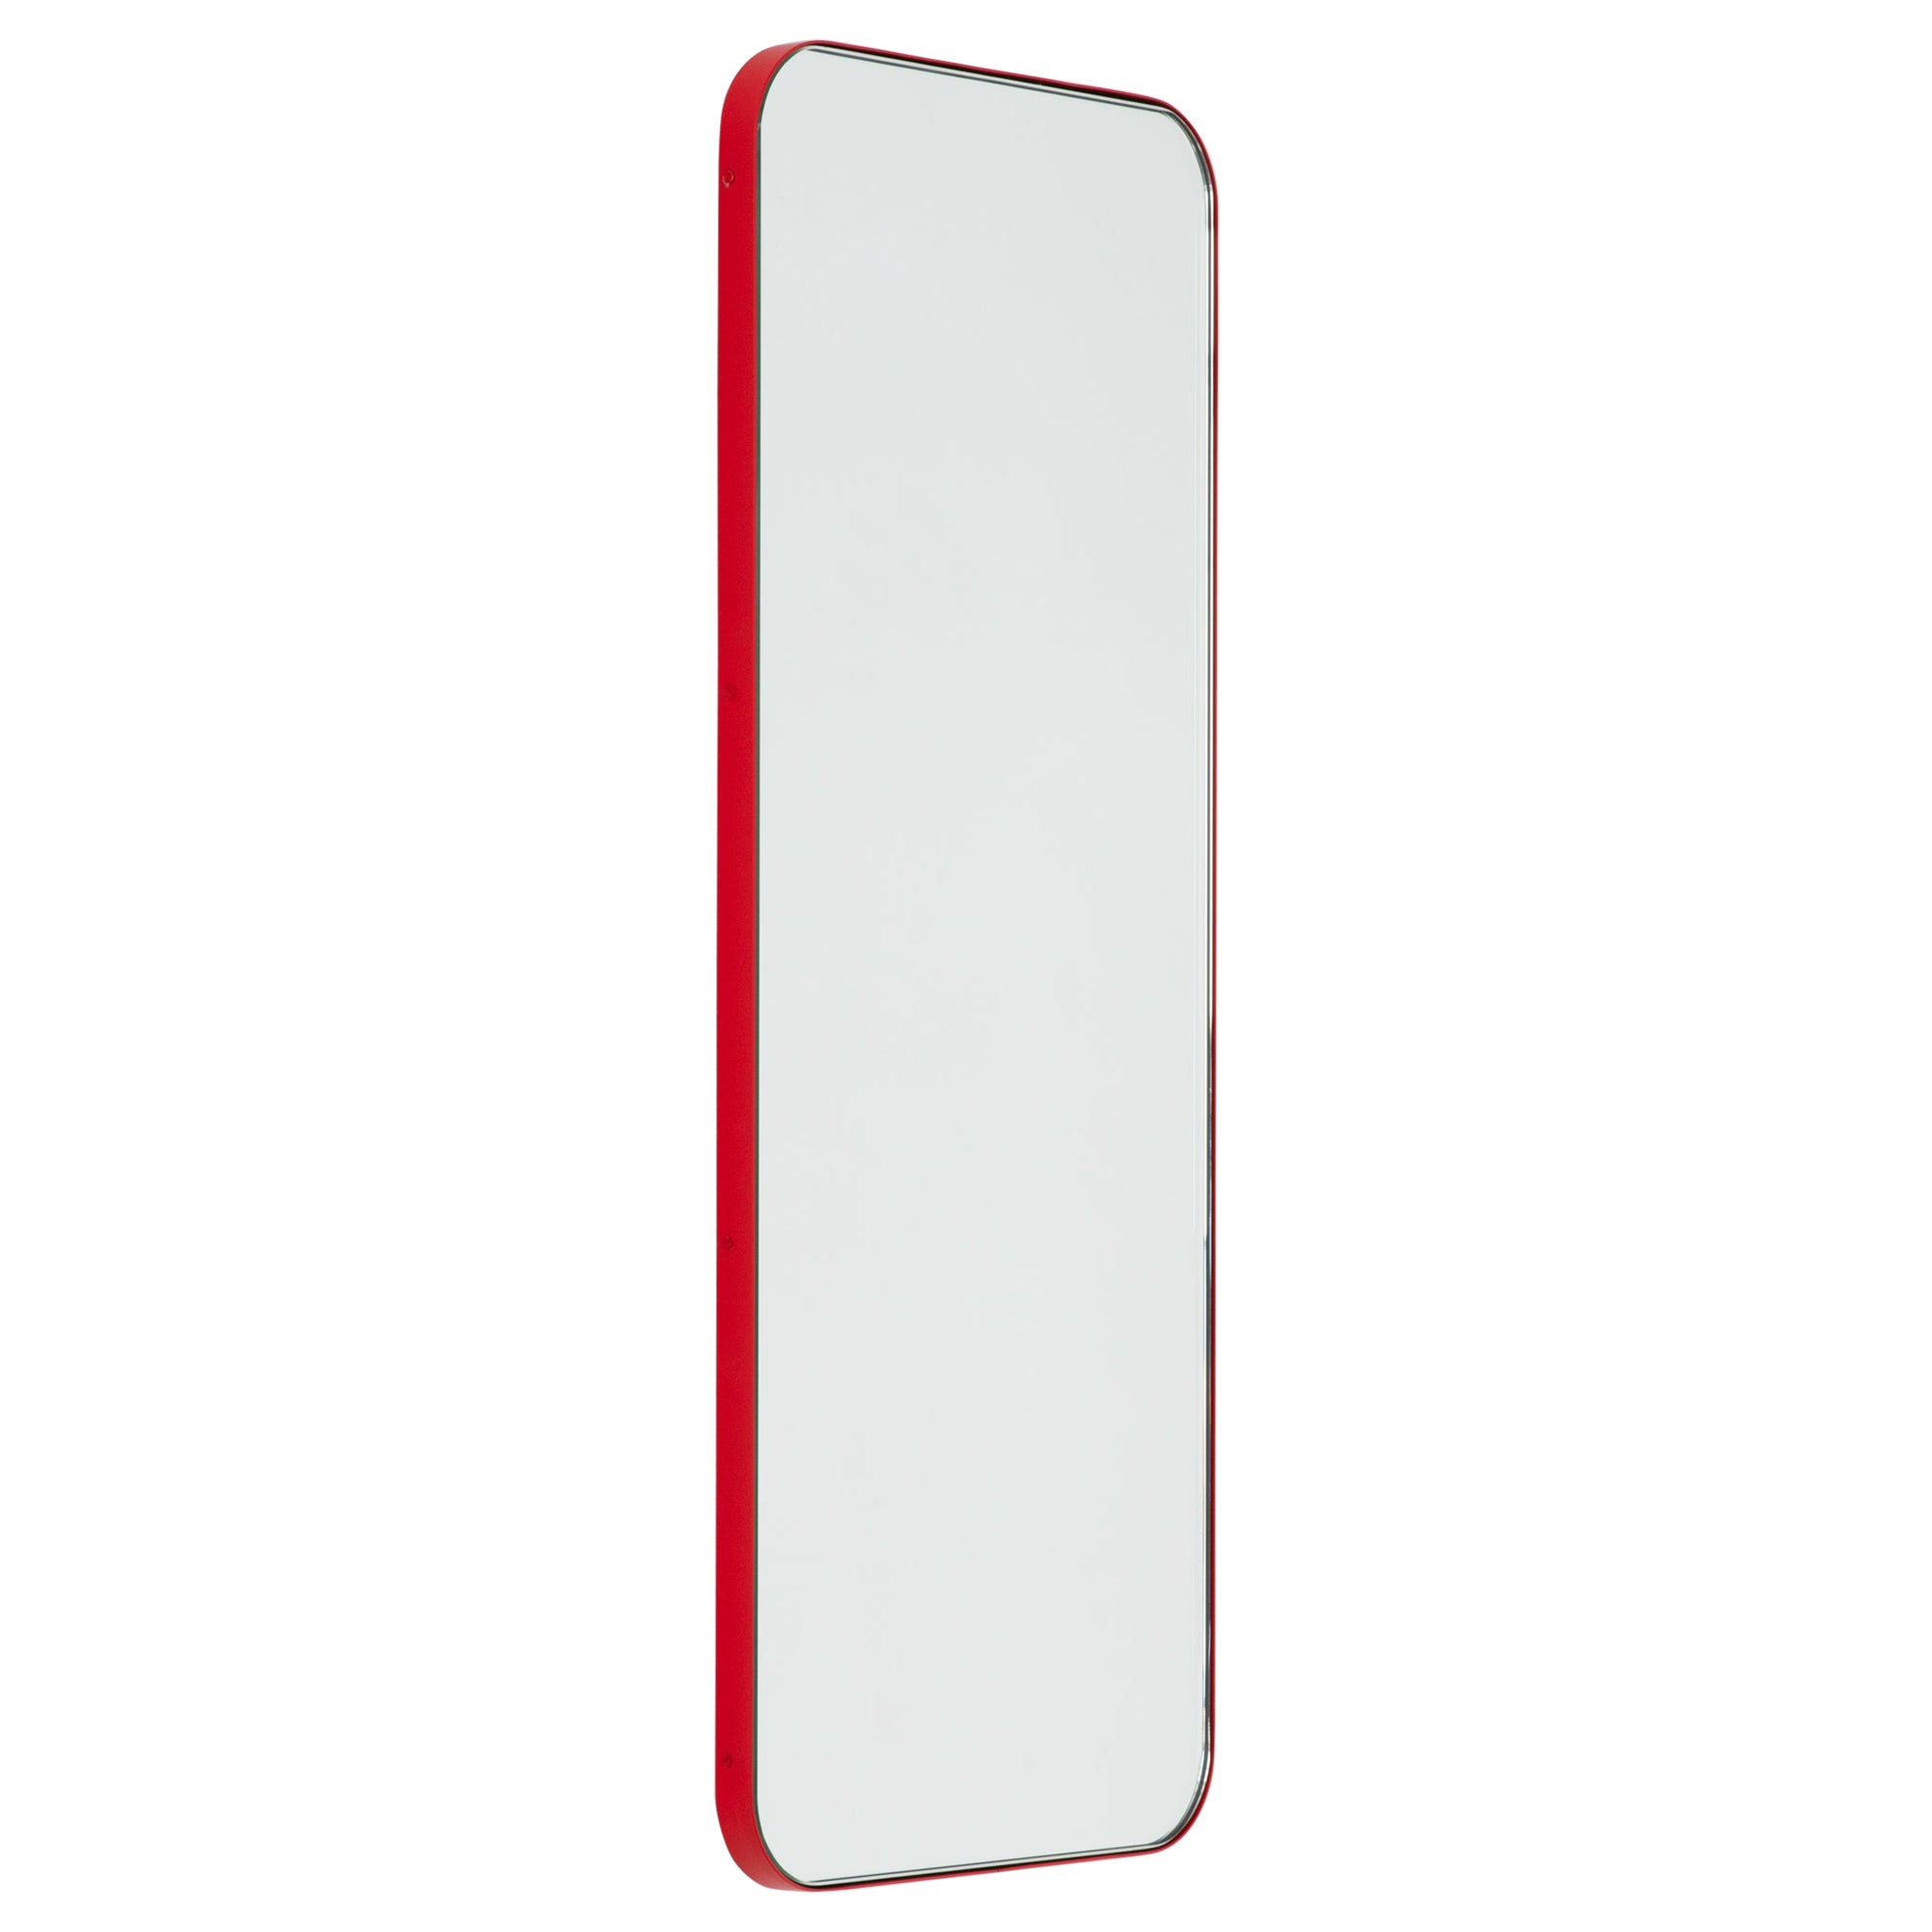 Quadris Rectangular Modern Mirror with a Red Frame, XL For Sale